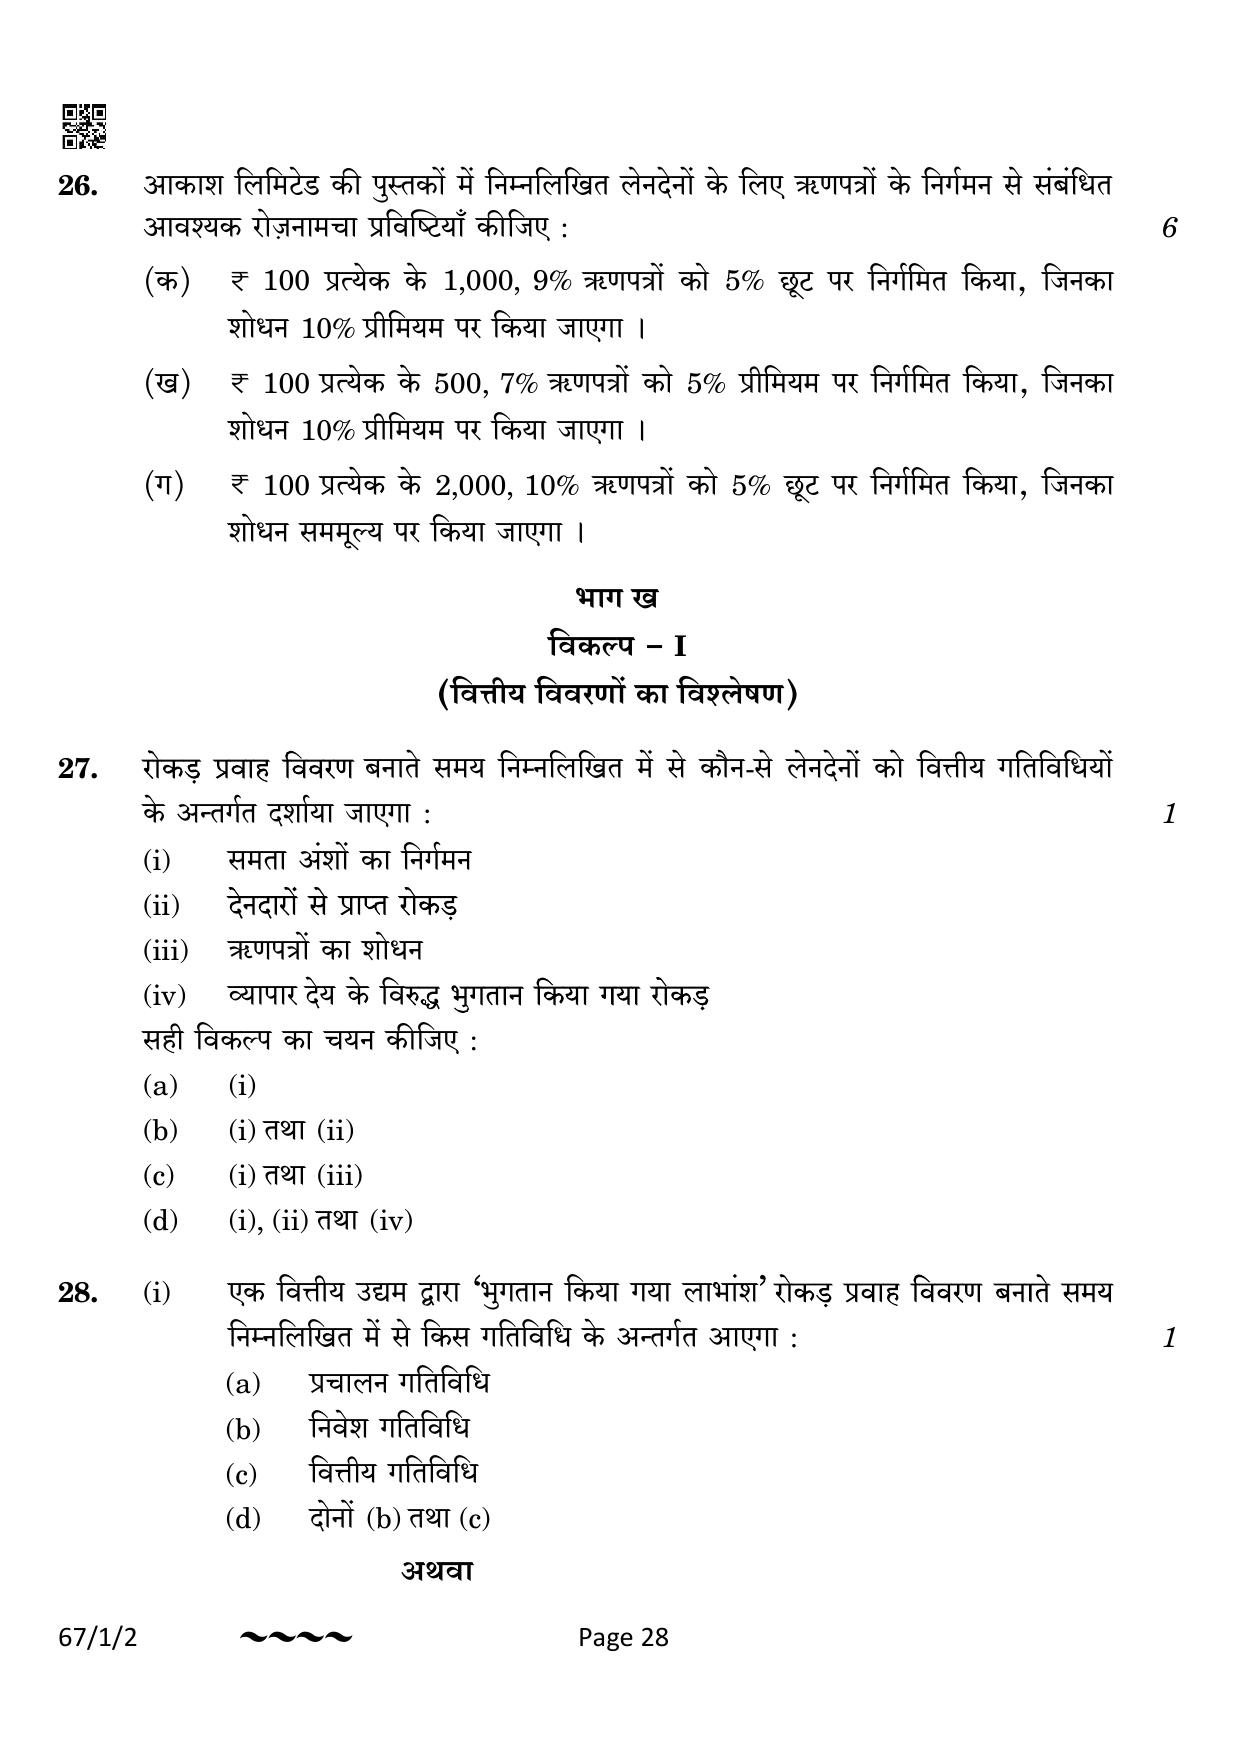 CBSE Class 12 67-1-2 Accountancy 2023 Question Paper - Page 28